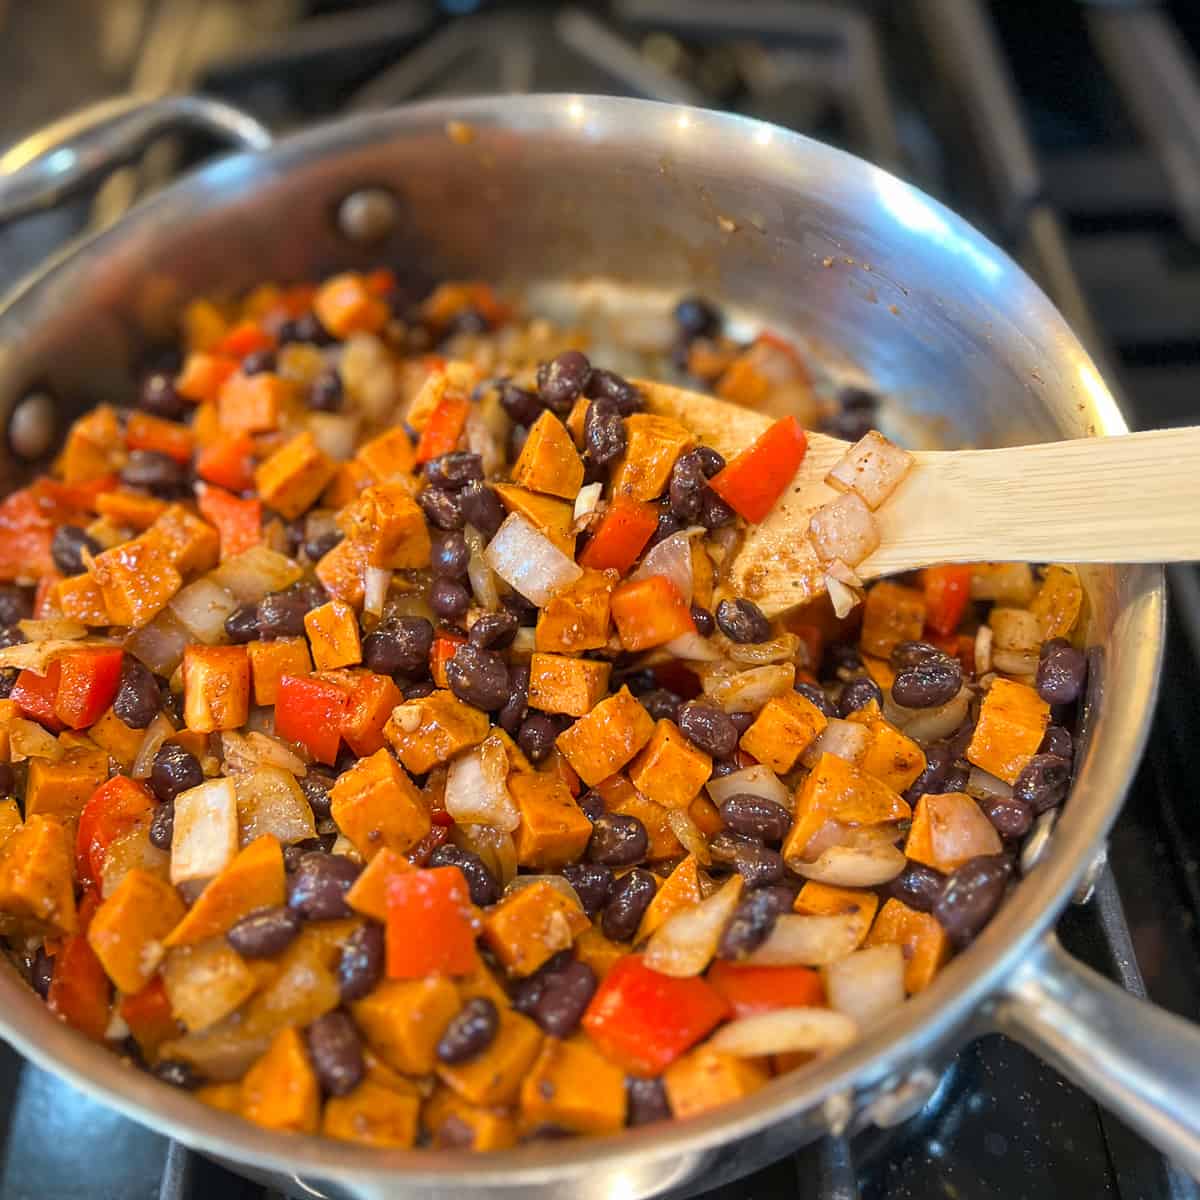 a wooden spoon stirring the veggies, beans and sweet potato with sauce